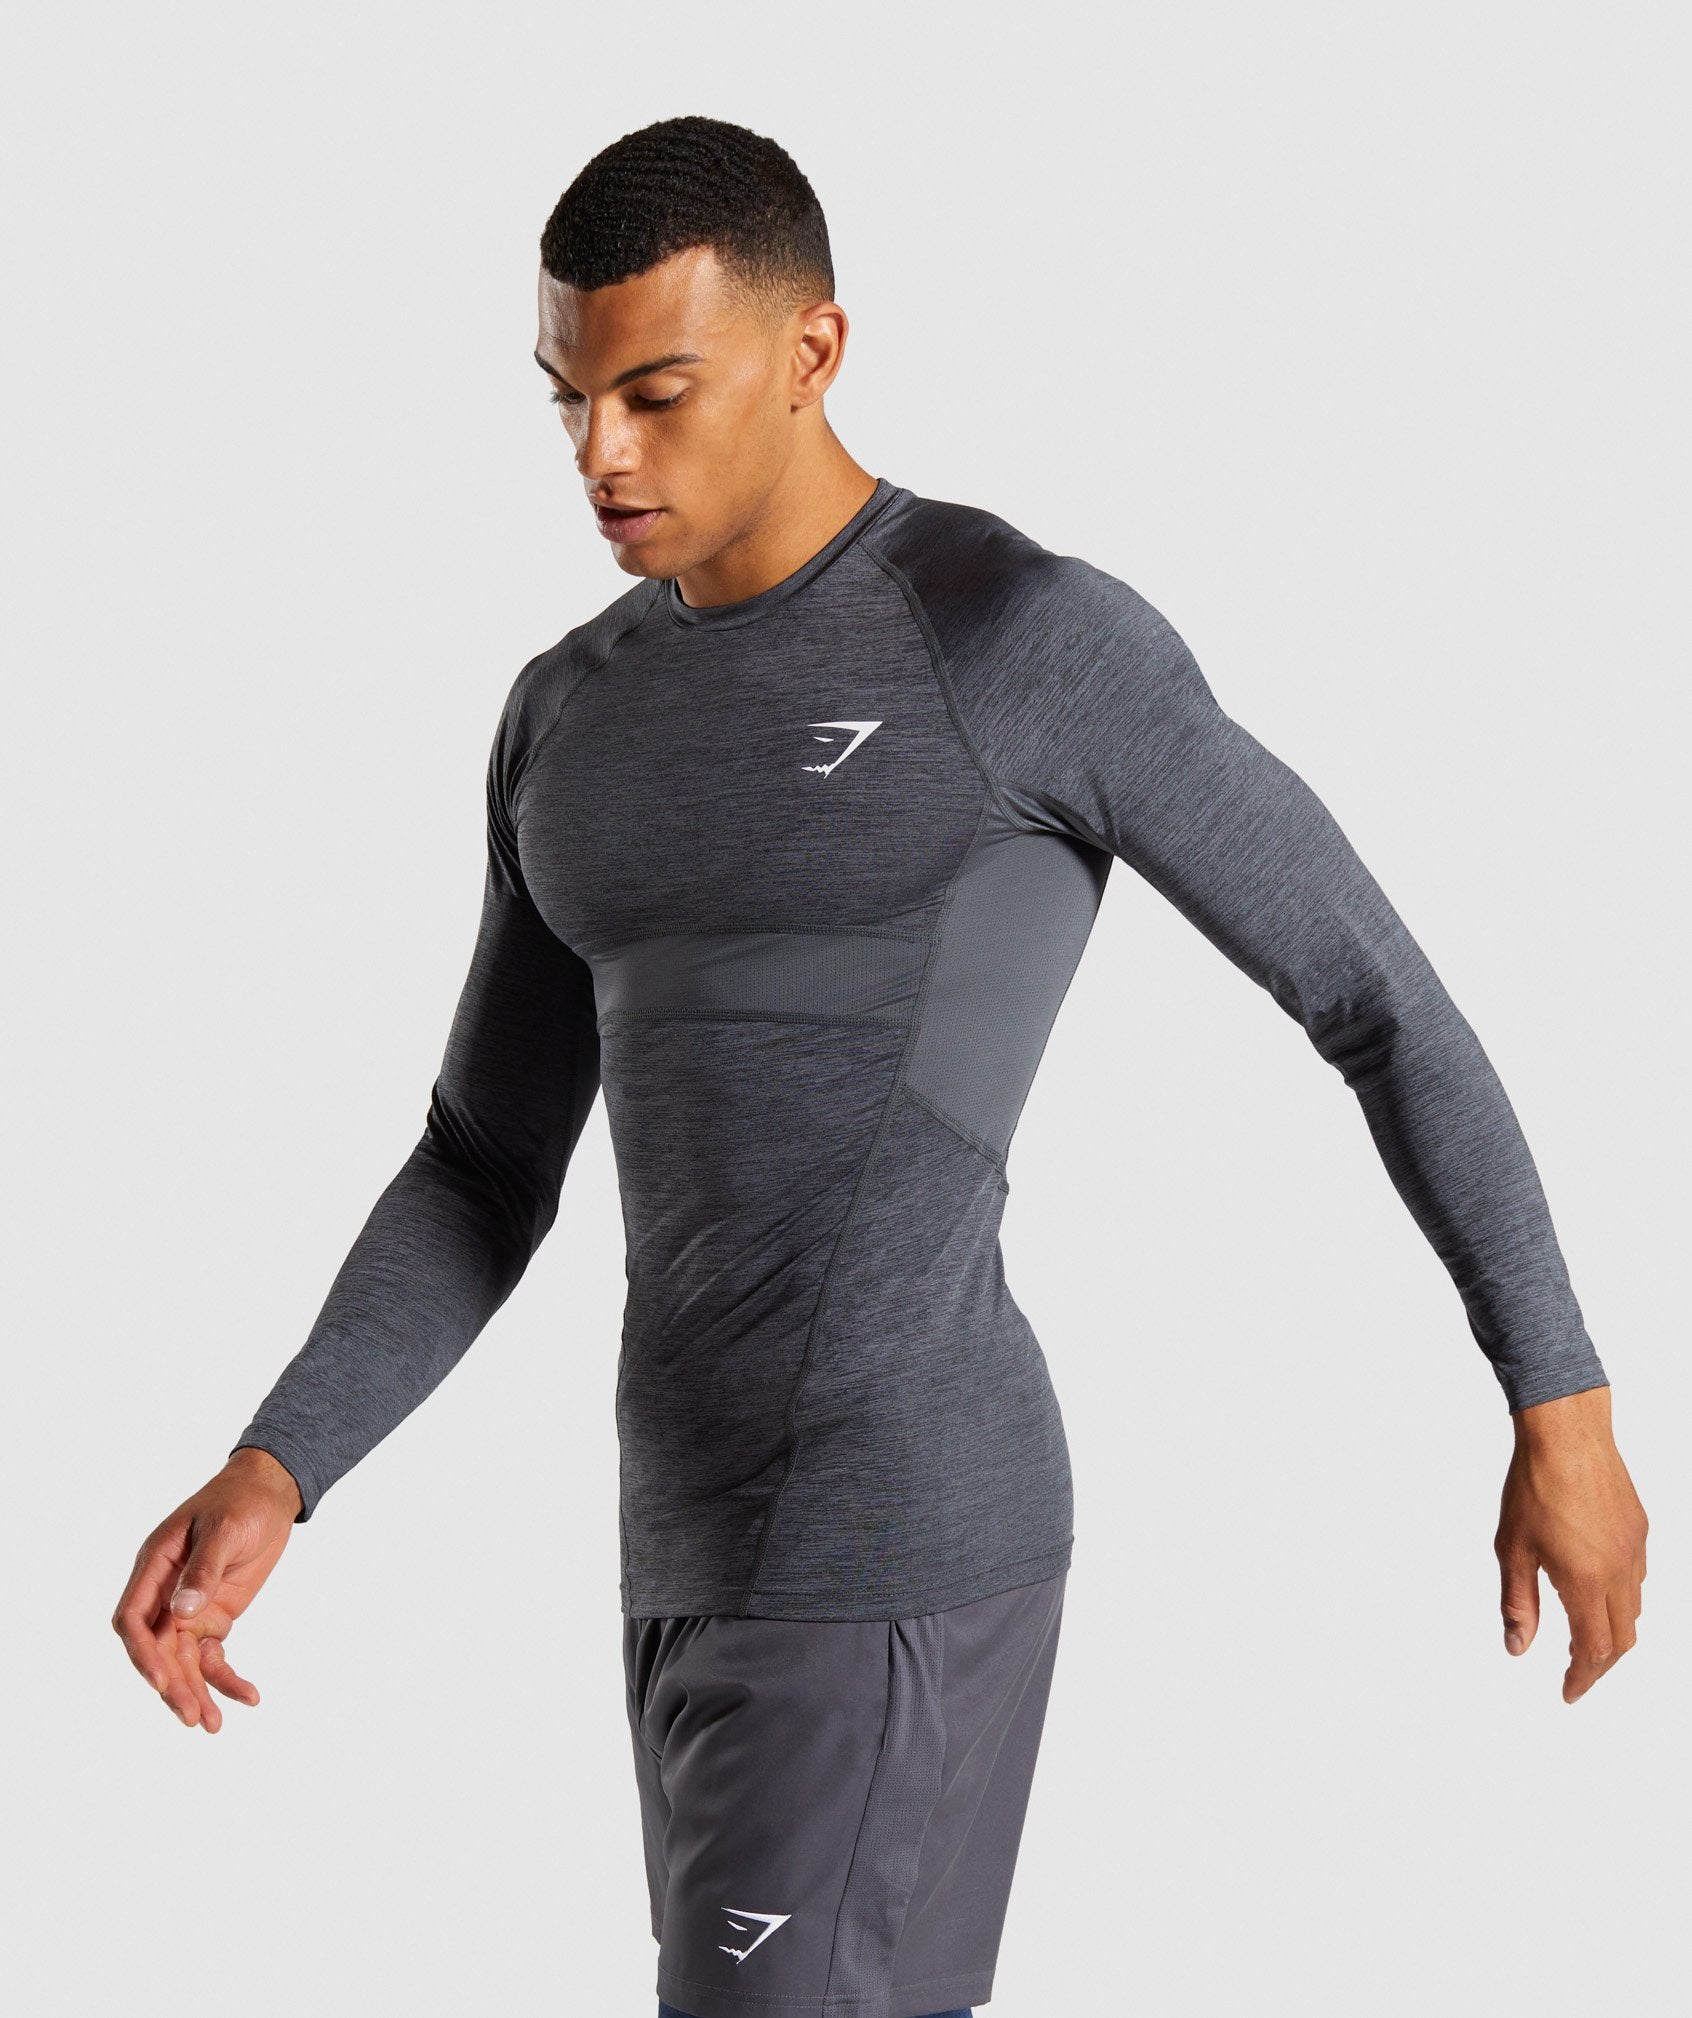 Element+ Baselayer Long Sleeve Top in Black Marl/White - view 3